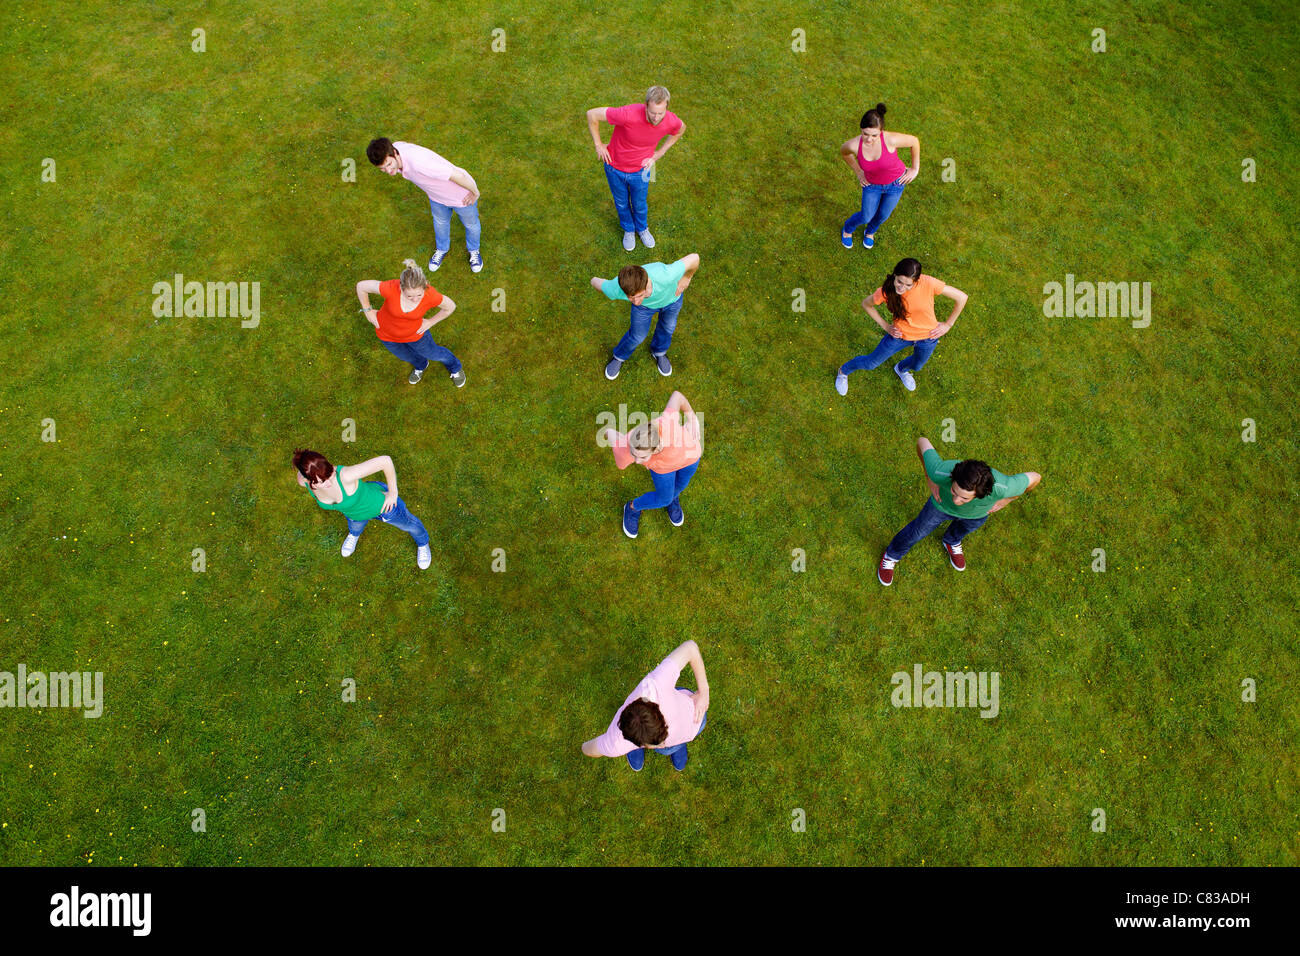 People stretching together in grass Stock Photo